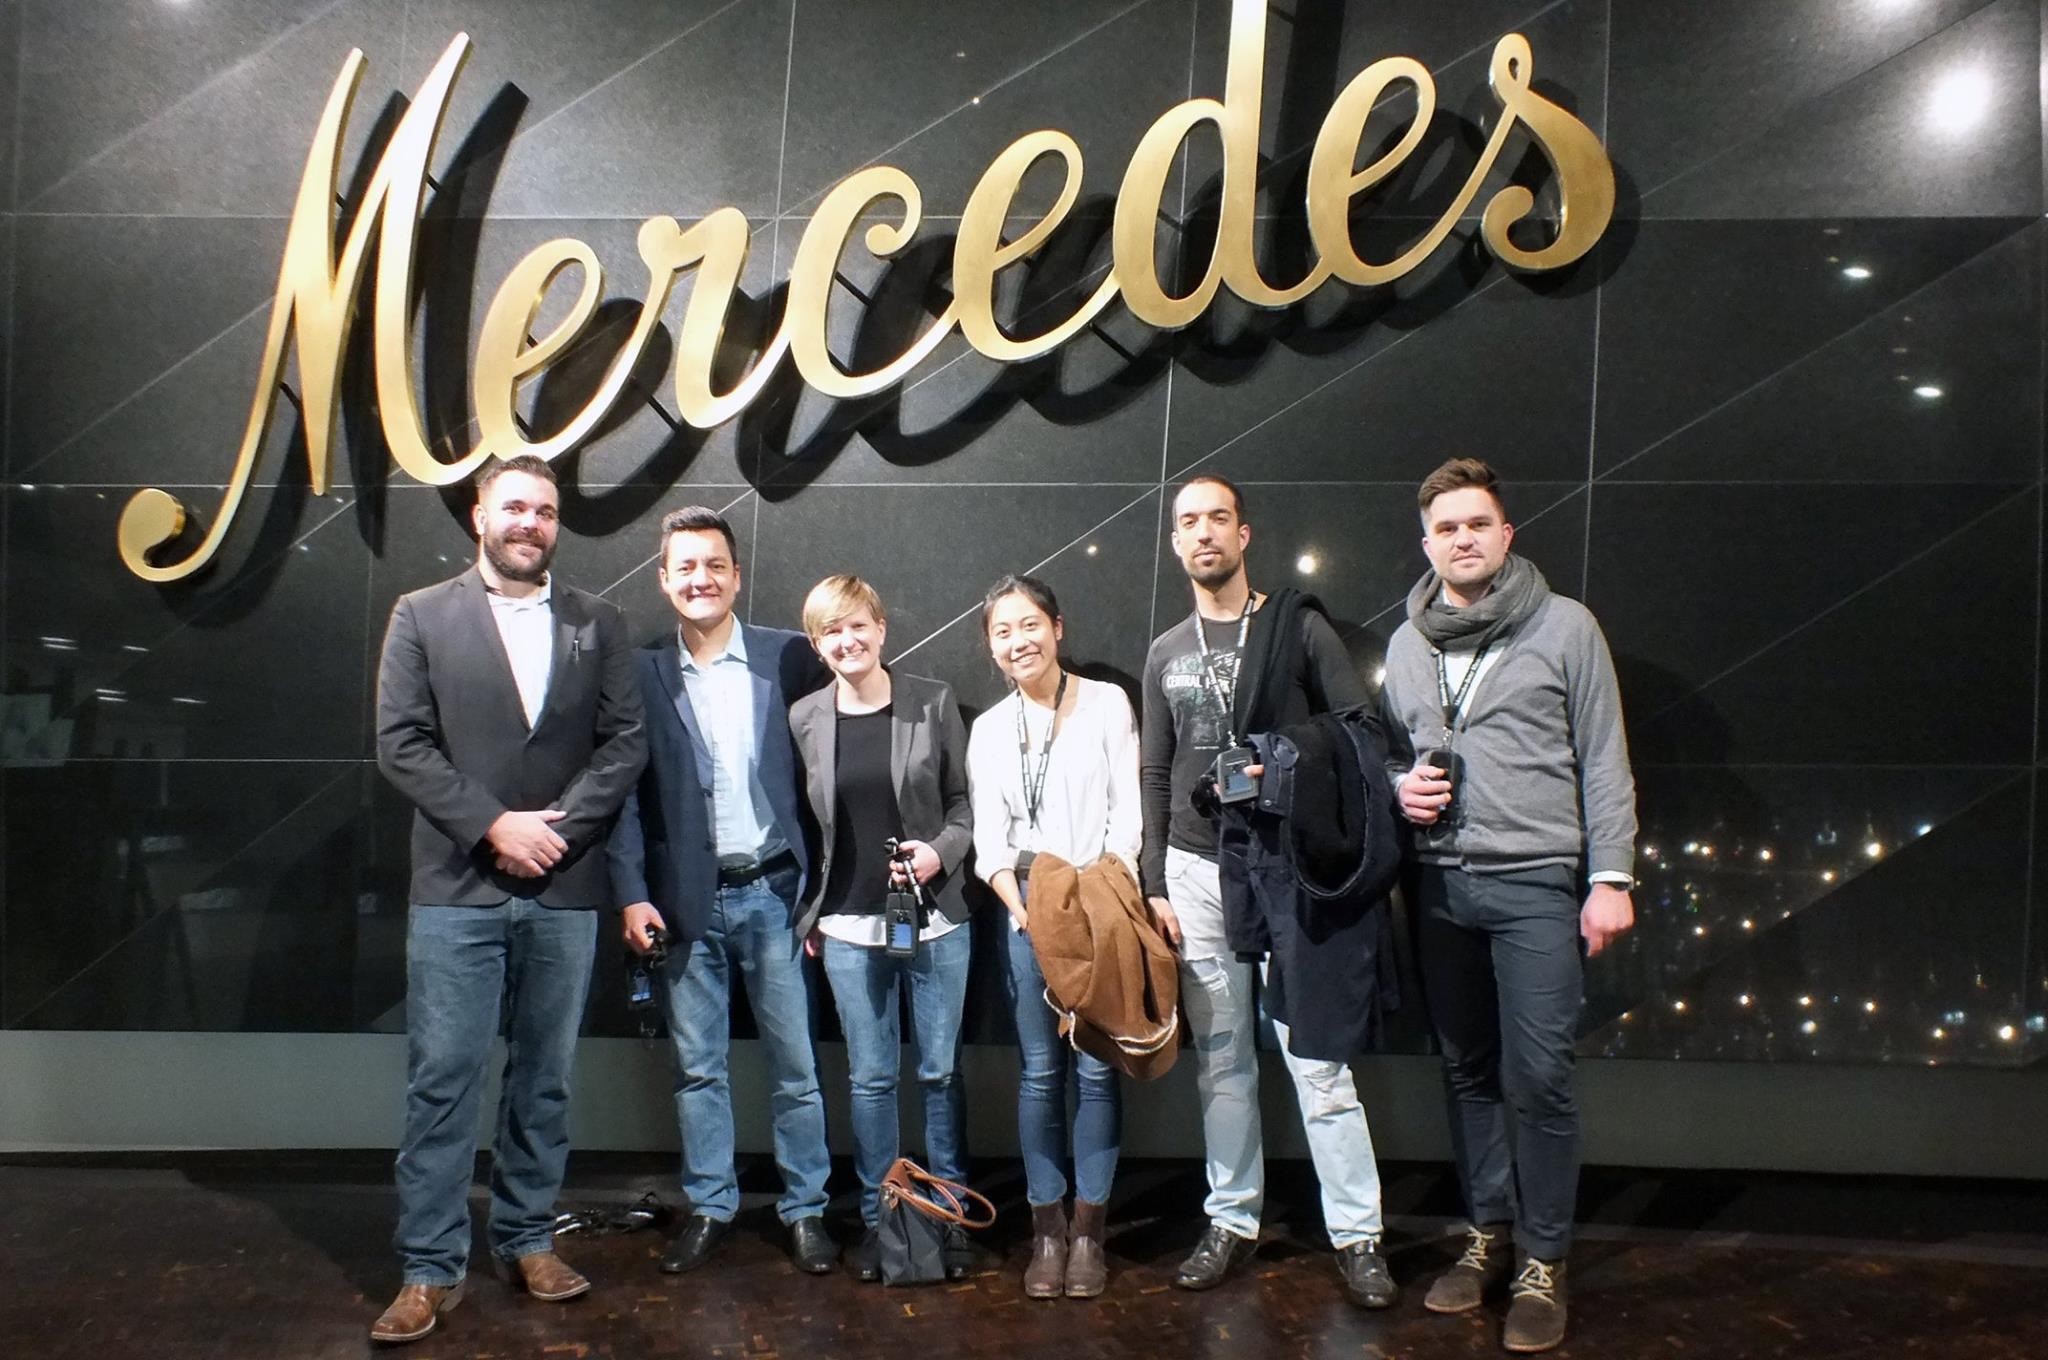 students in front of Mercedes sign